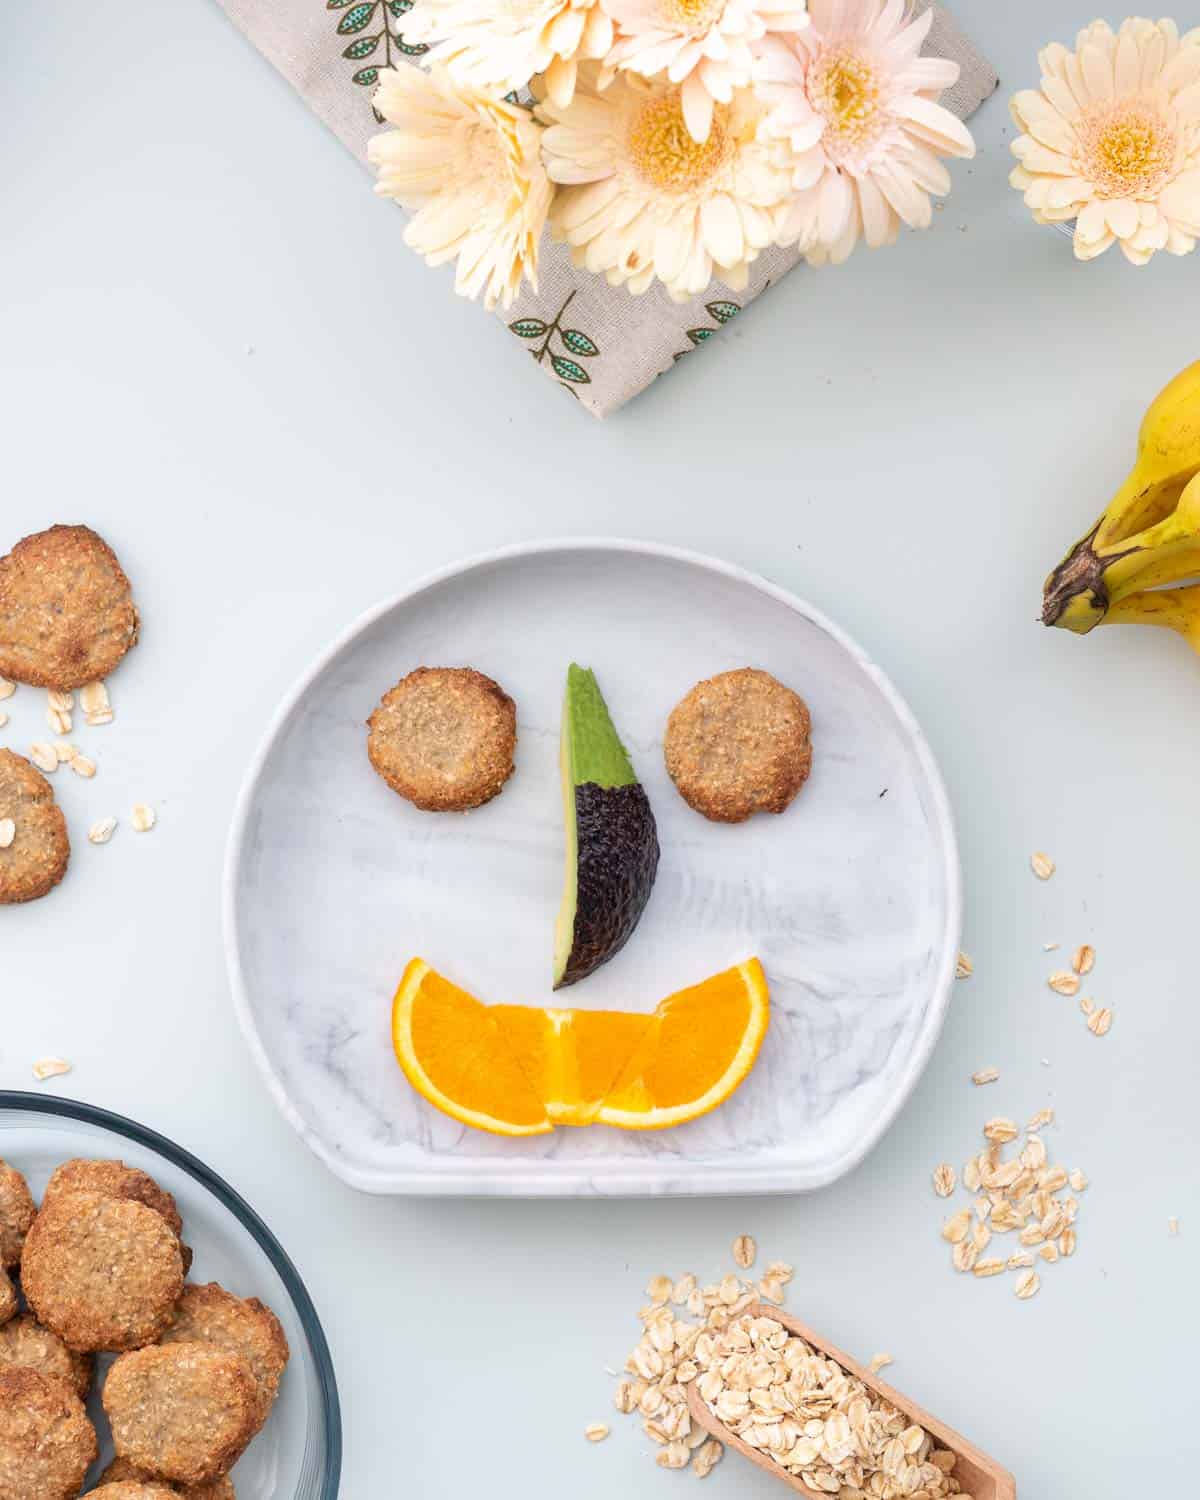 A silicone baby plate with food placed on it to look like a face. cookie eye, avocado nose, orange slice mouth.